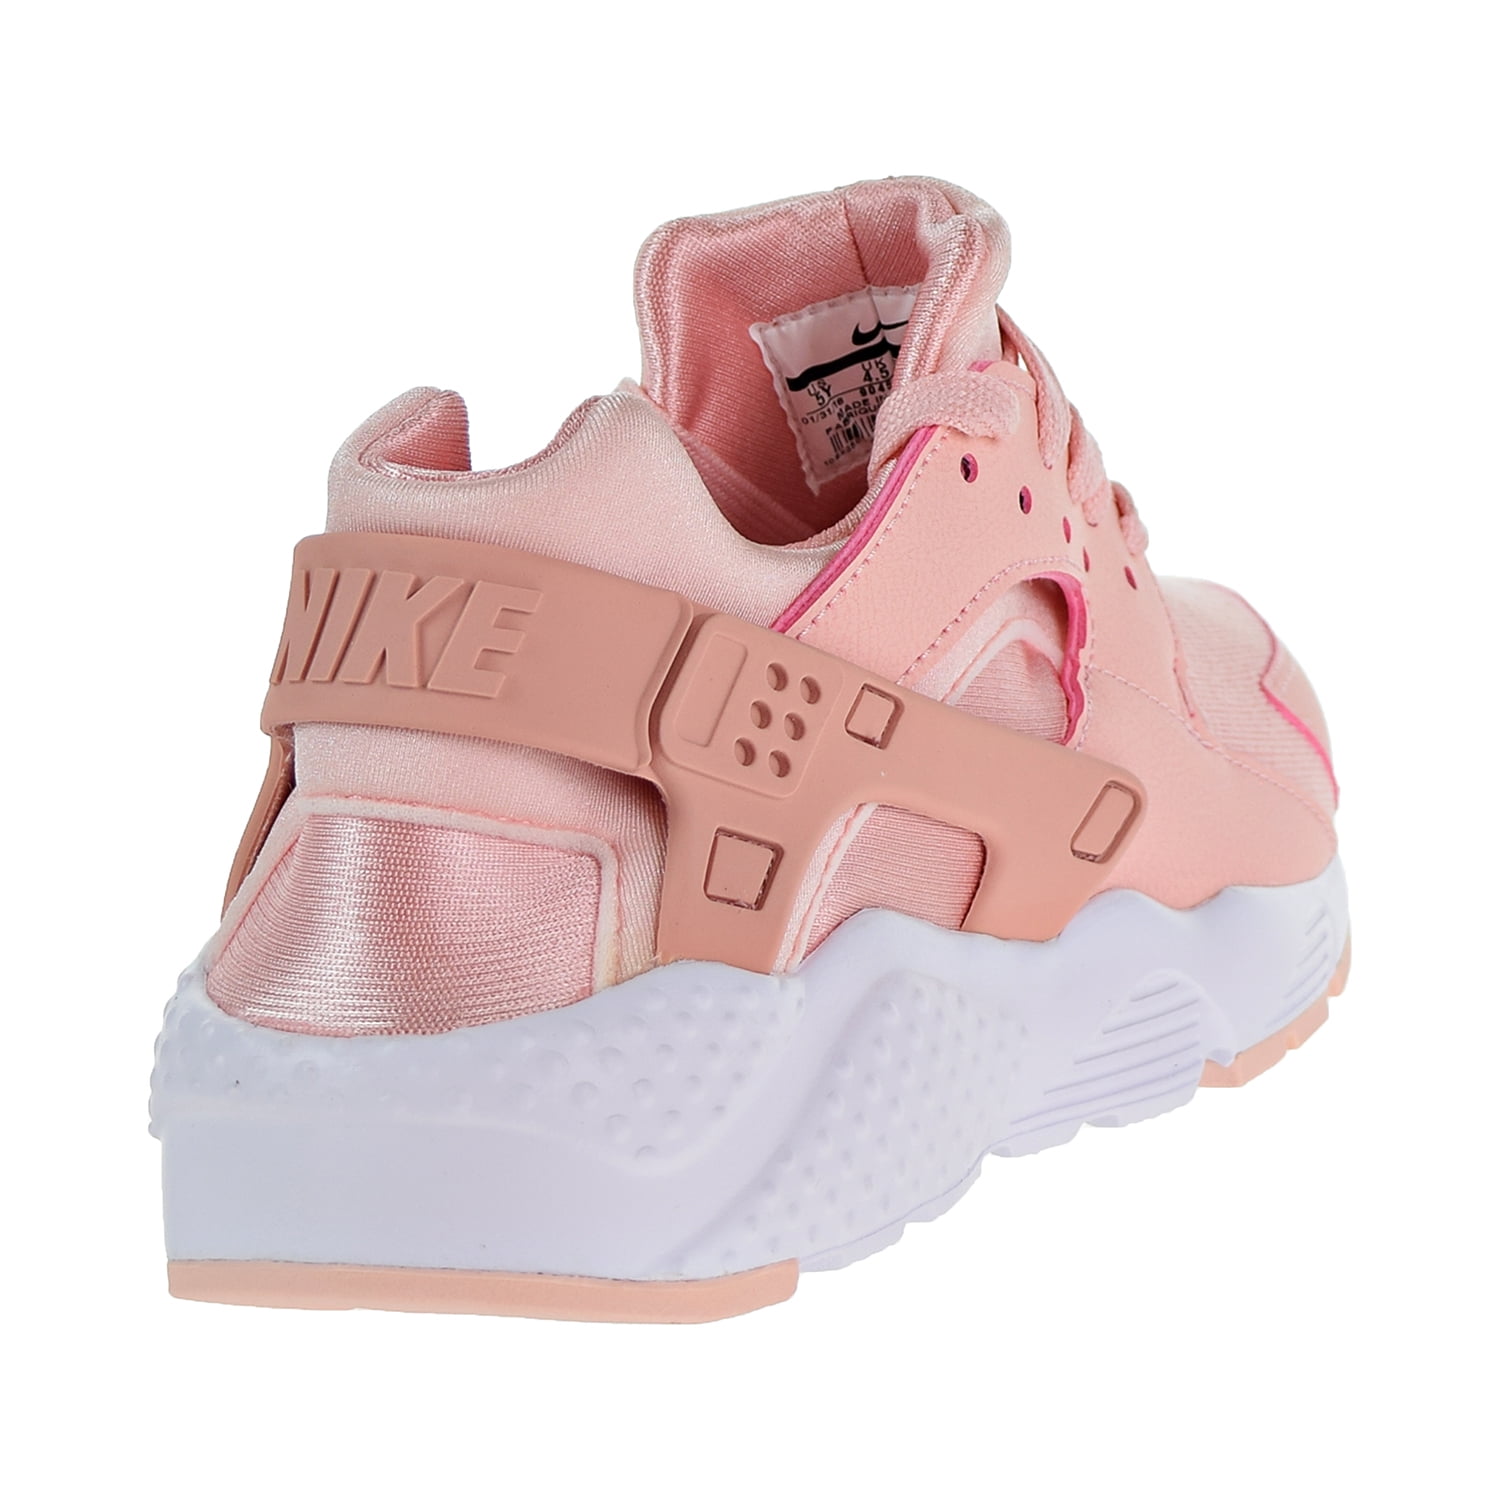 pink huaraches infant